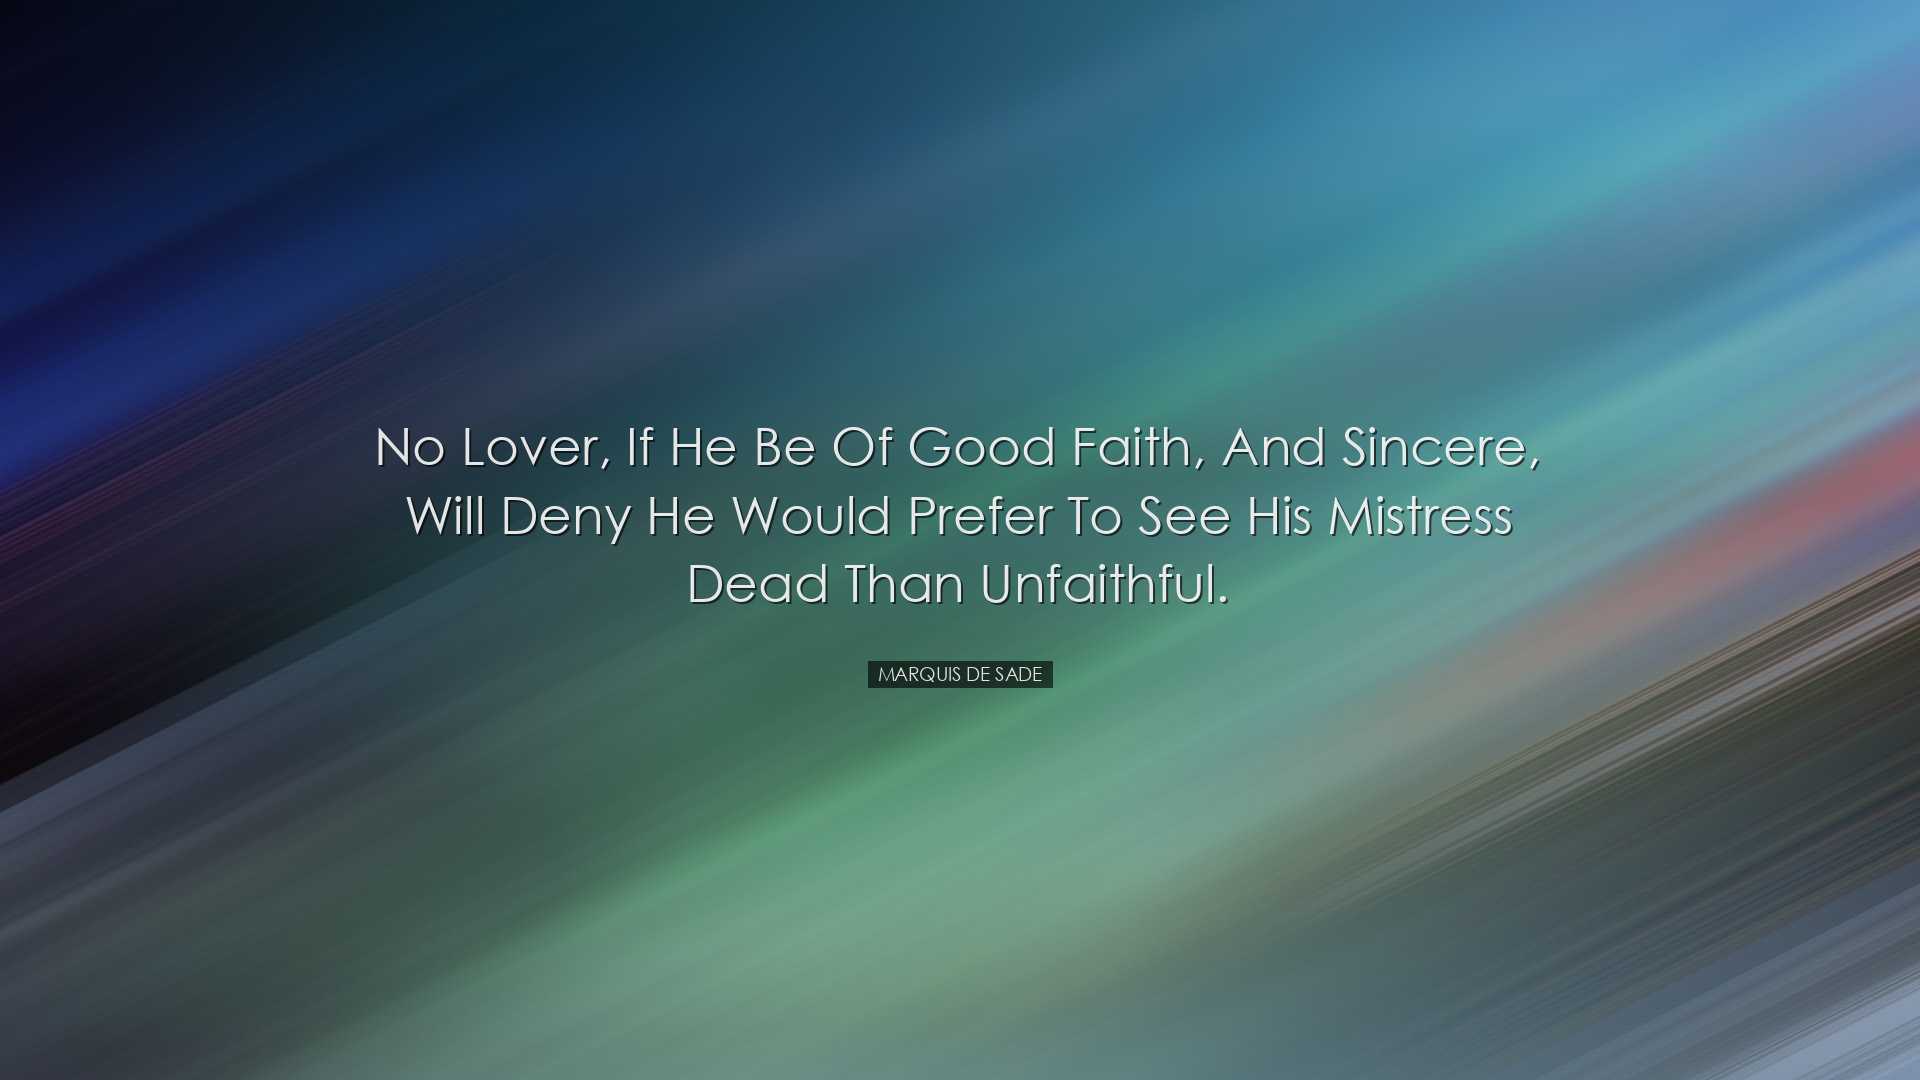 No lover, if he be of good faith, and sincere, will deny he would